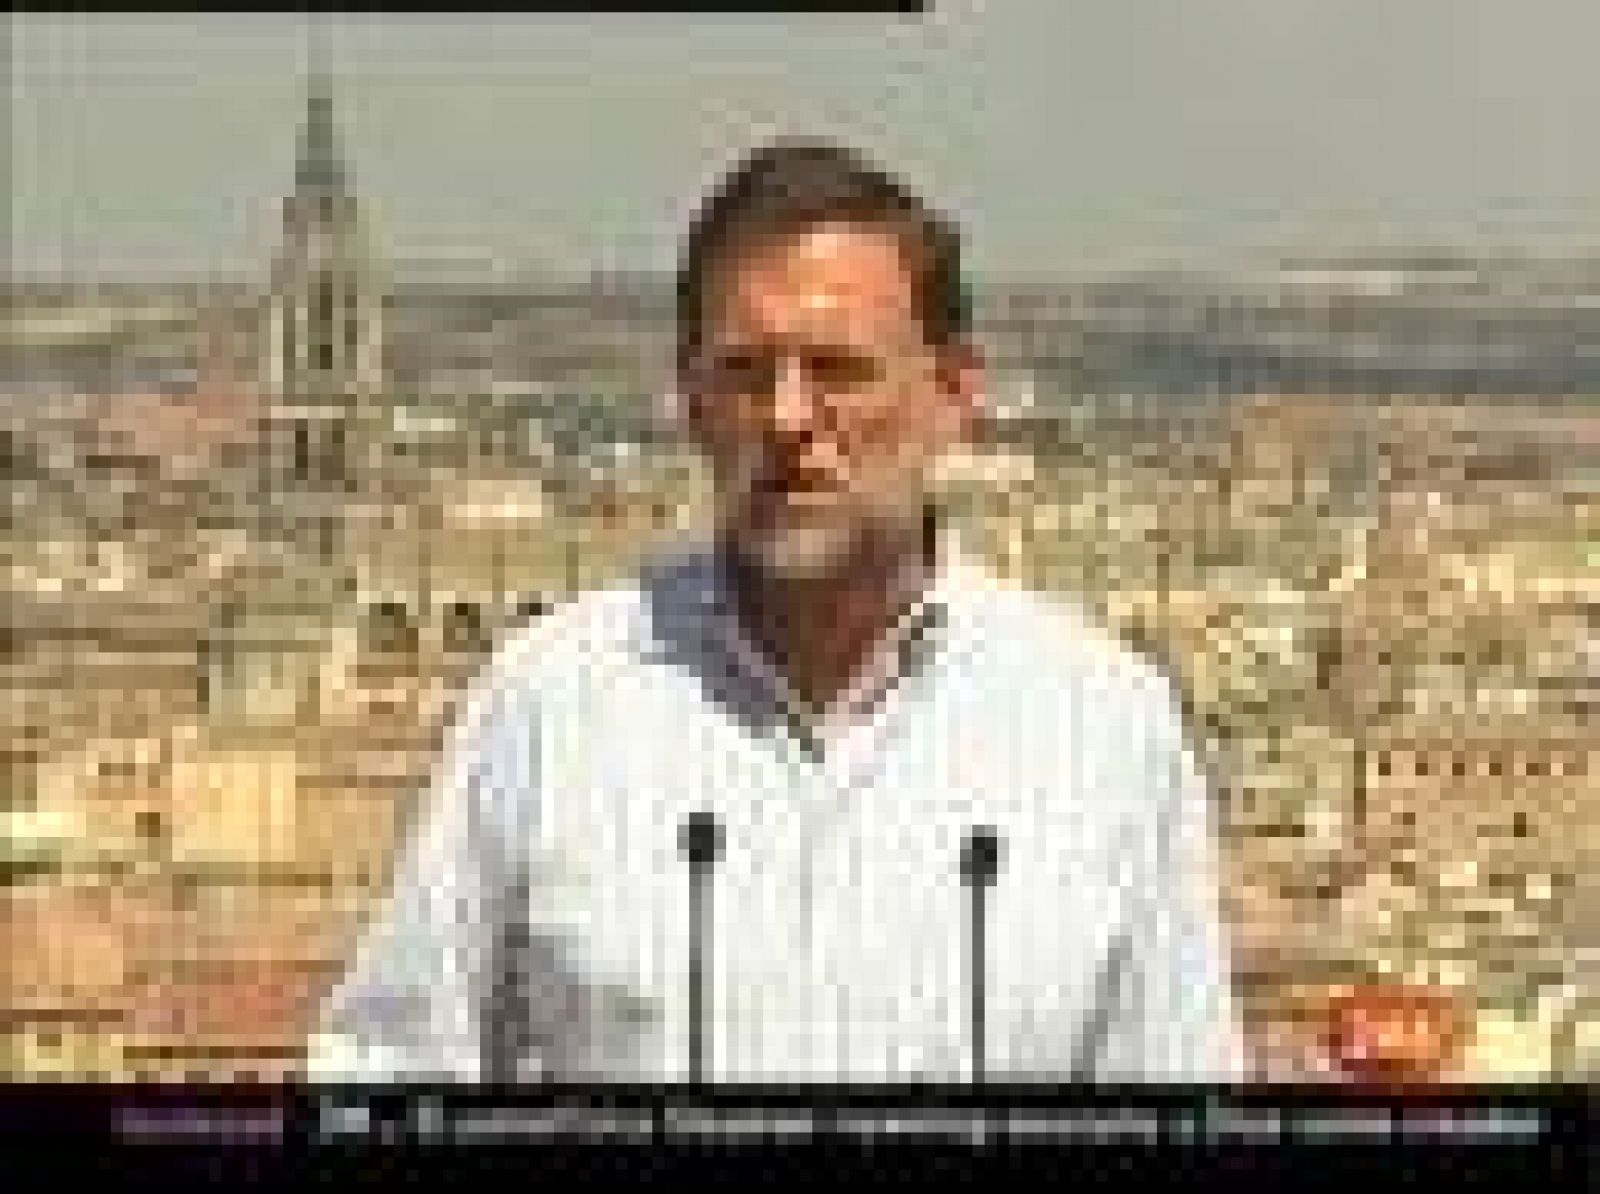 Sin programa: Rajoy ratifica a Camps candidato | RTVE Play